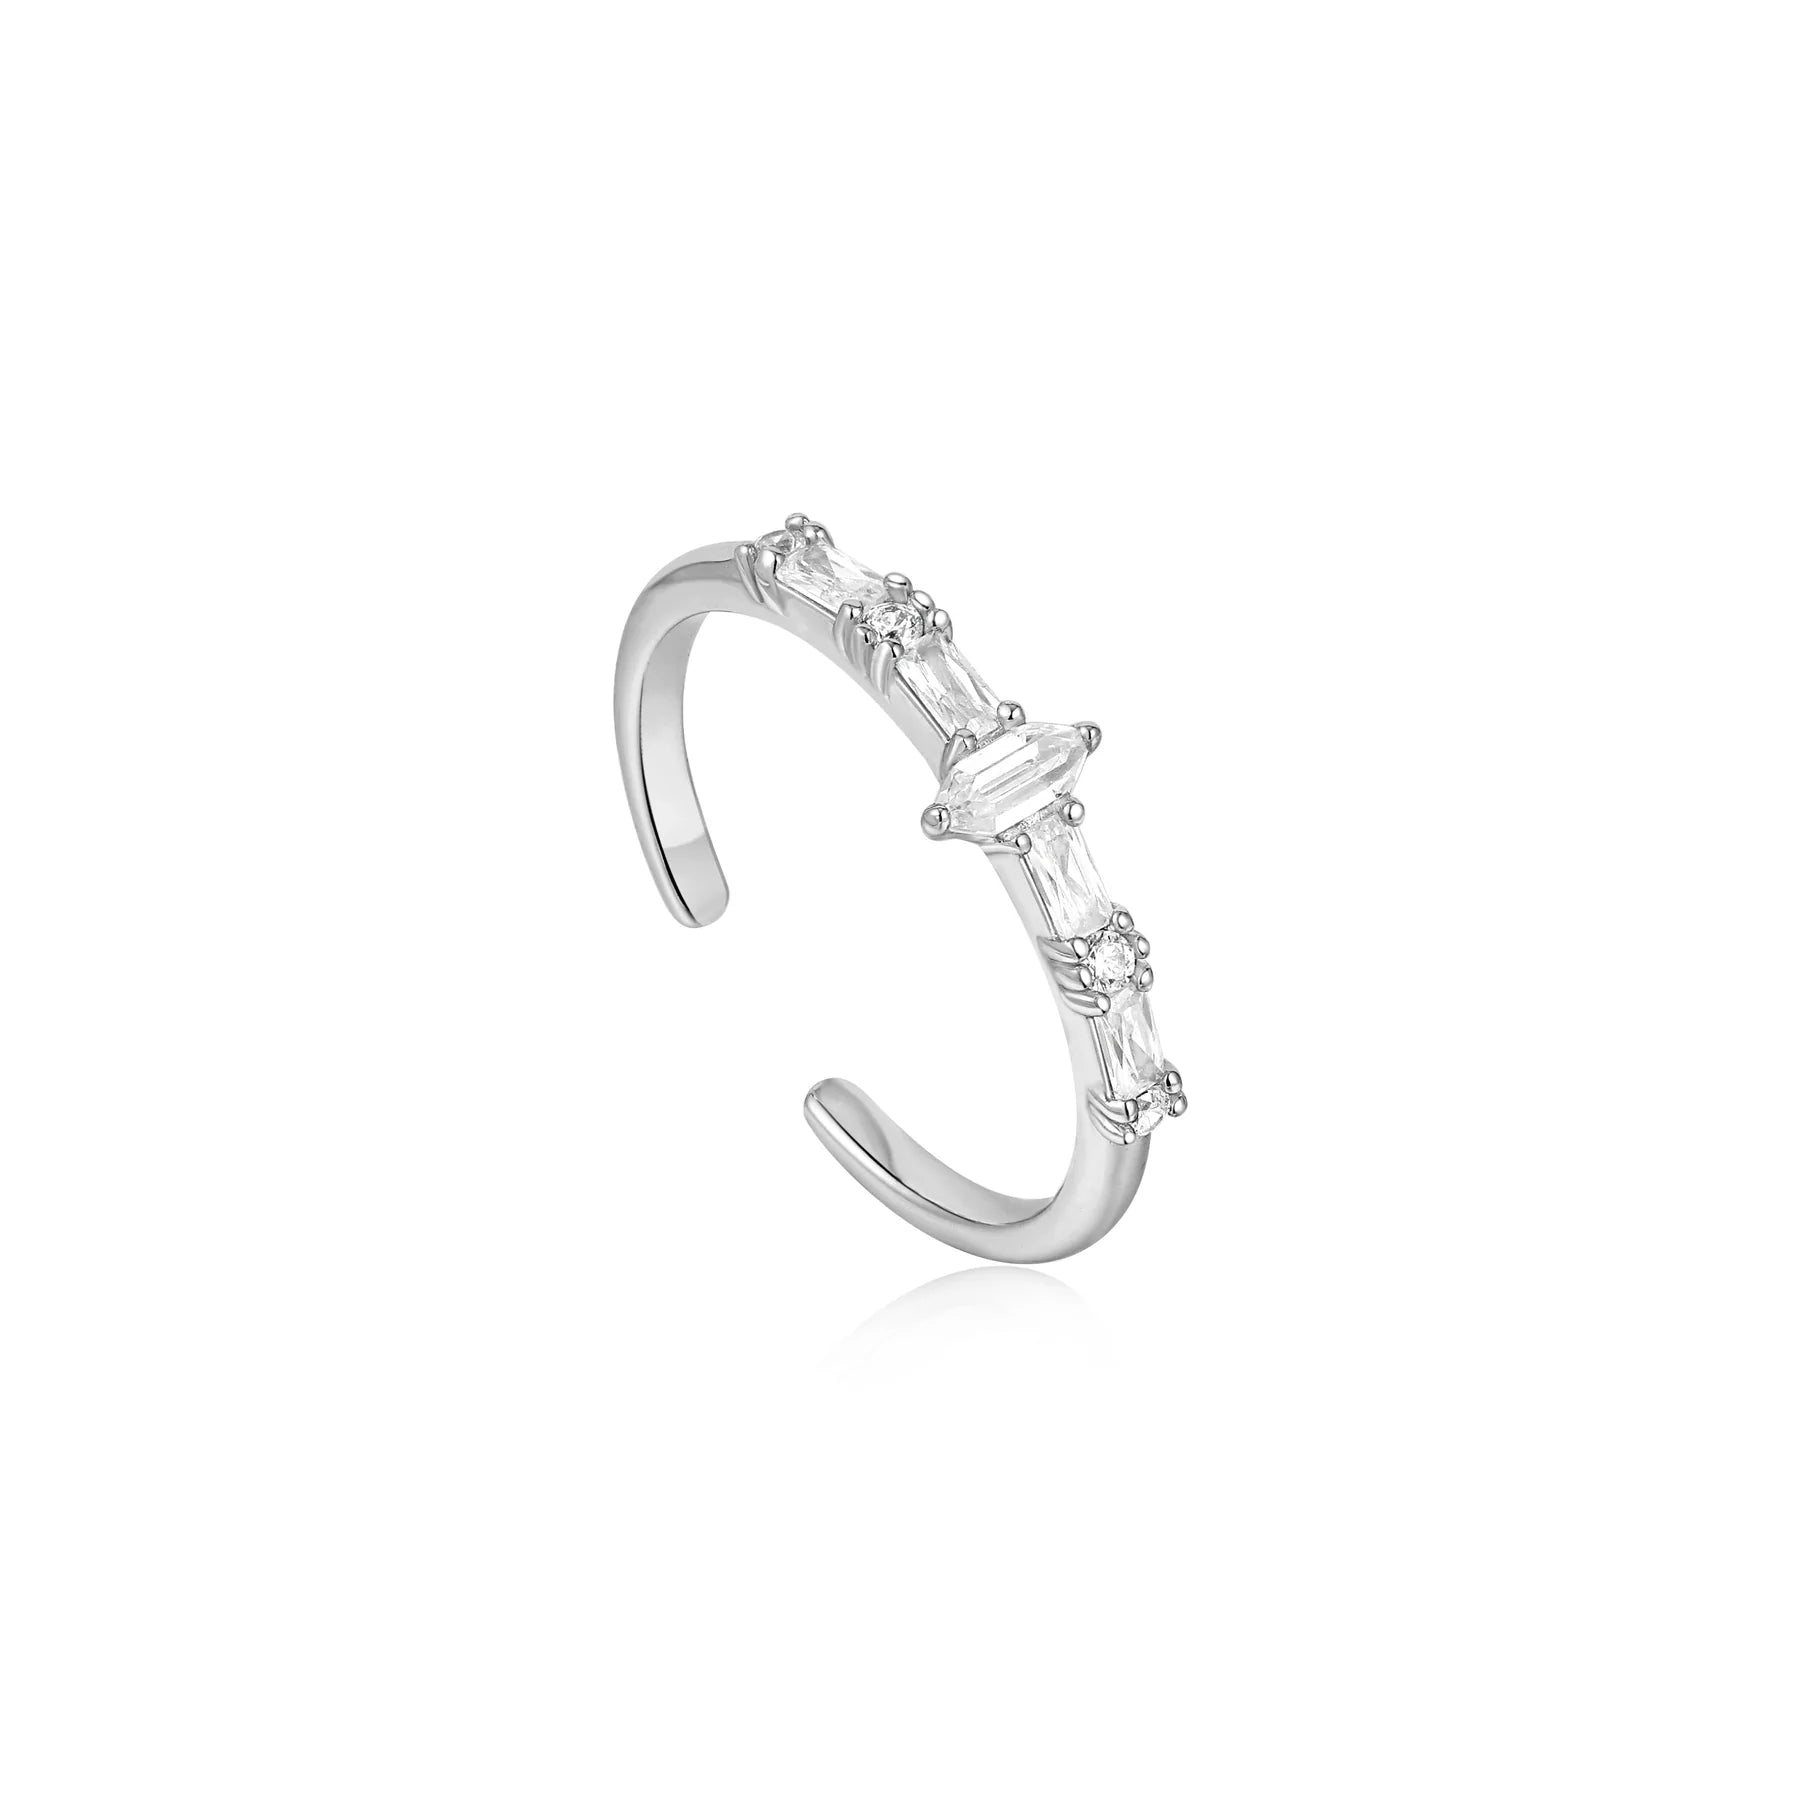 Ania Haie - Ring Sparkle Multi Stone Band Silver